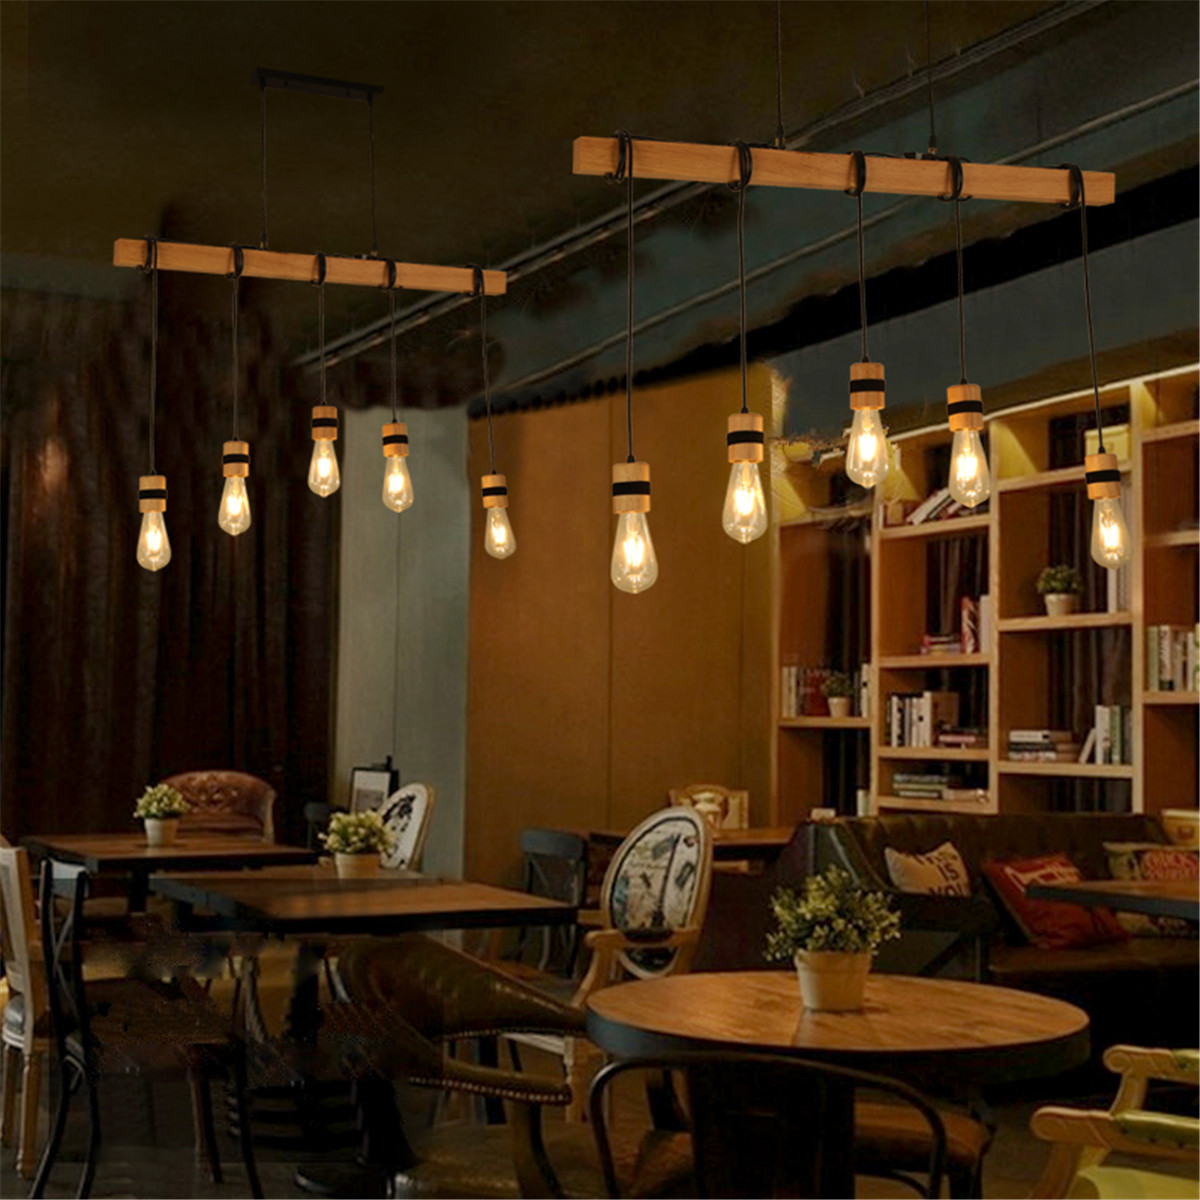 AC85-265V-Industrial-Wooden-E27-Pendant-Light-Ceiling-Lamp-Chandeliers-Lighting-Fixtures-Without-Bul-1815131-8